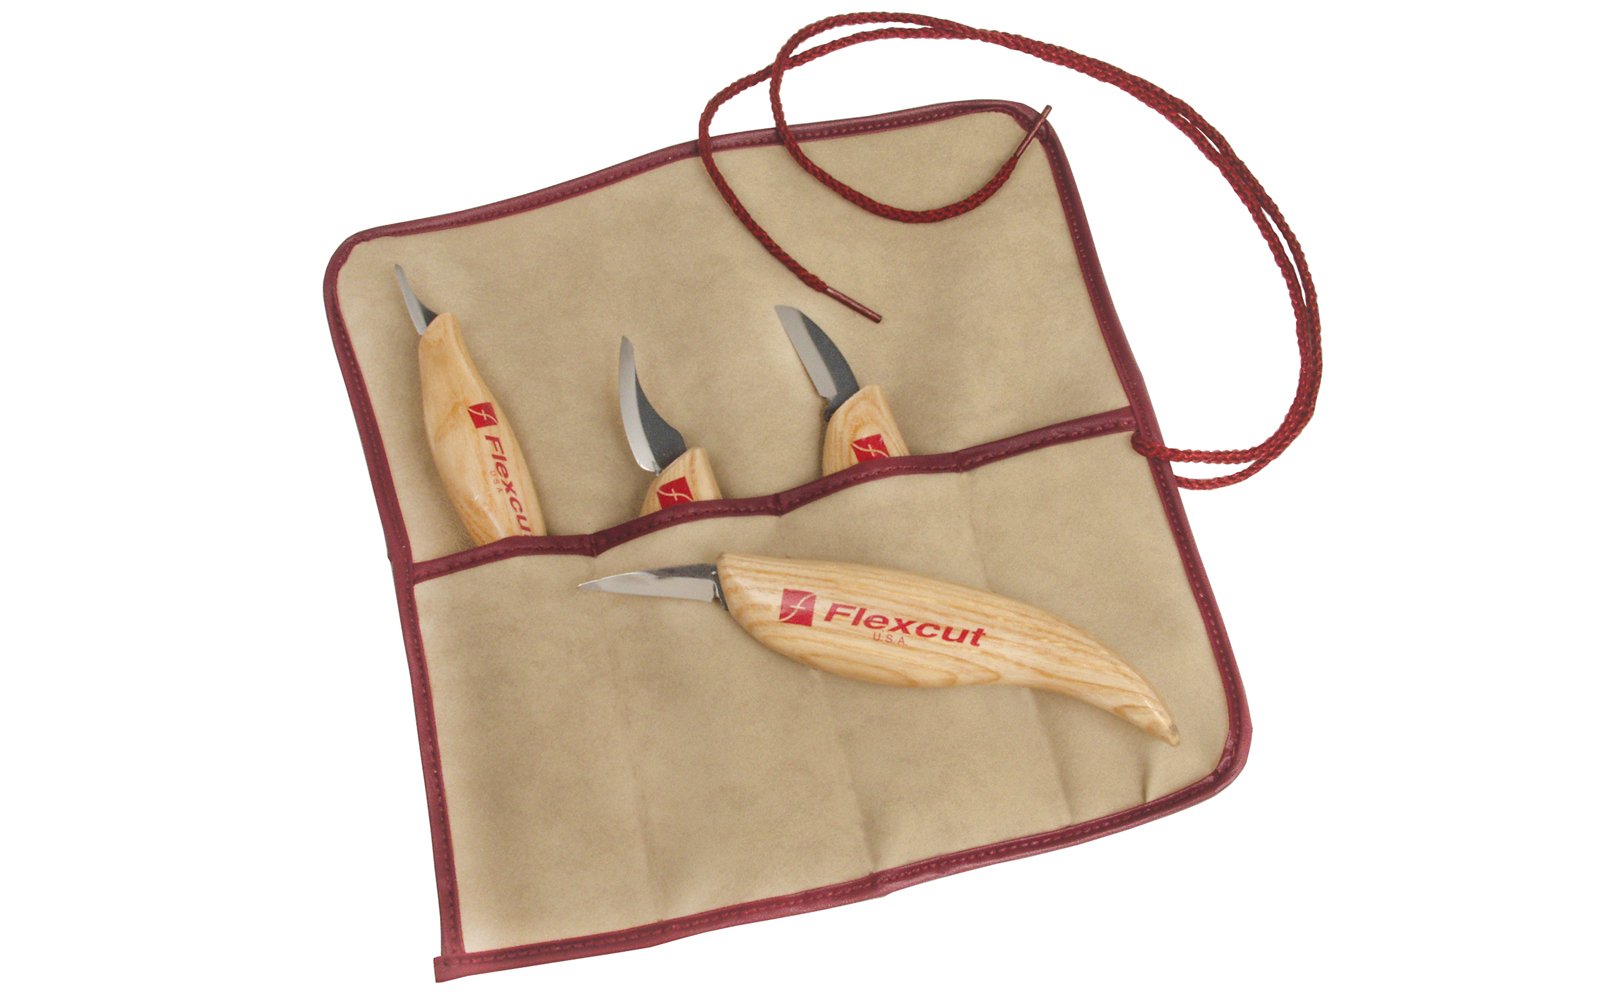 Flexcut 4-Knife Starter Carving Set ~ Flexcut's KN12 Cutting Knife,  KN13 Detail Knife,  KN18 Pelican Knife, & KN19 Mini-Pelican Knife are included in this set ~ High Carbon Spring Steel blades - Tempered to HRC 59-61 - Made in USA - Flexcut Four Piece Set ~ Flexcut 4-piece set - Includes Tool Roll ~ Flexcut Knife Set and Tool Roll - KN100